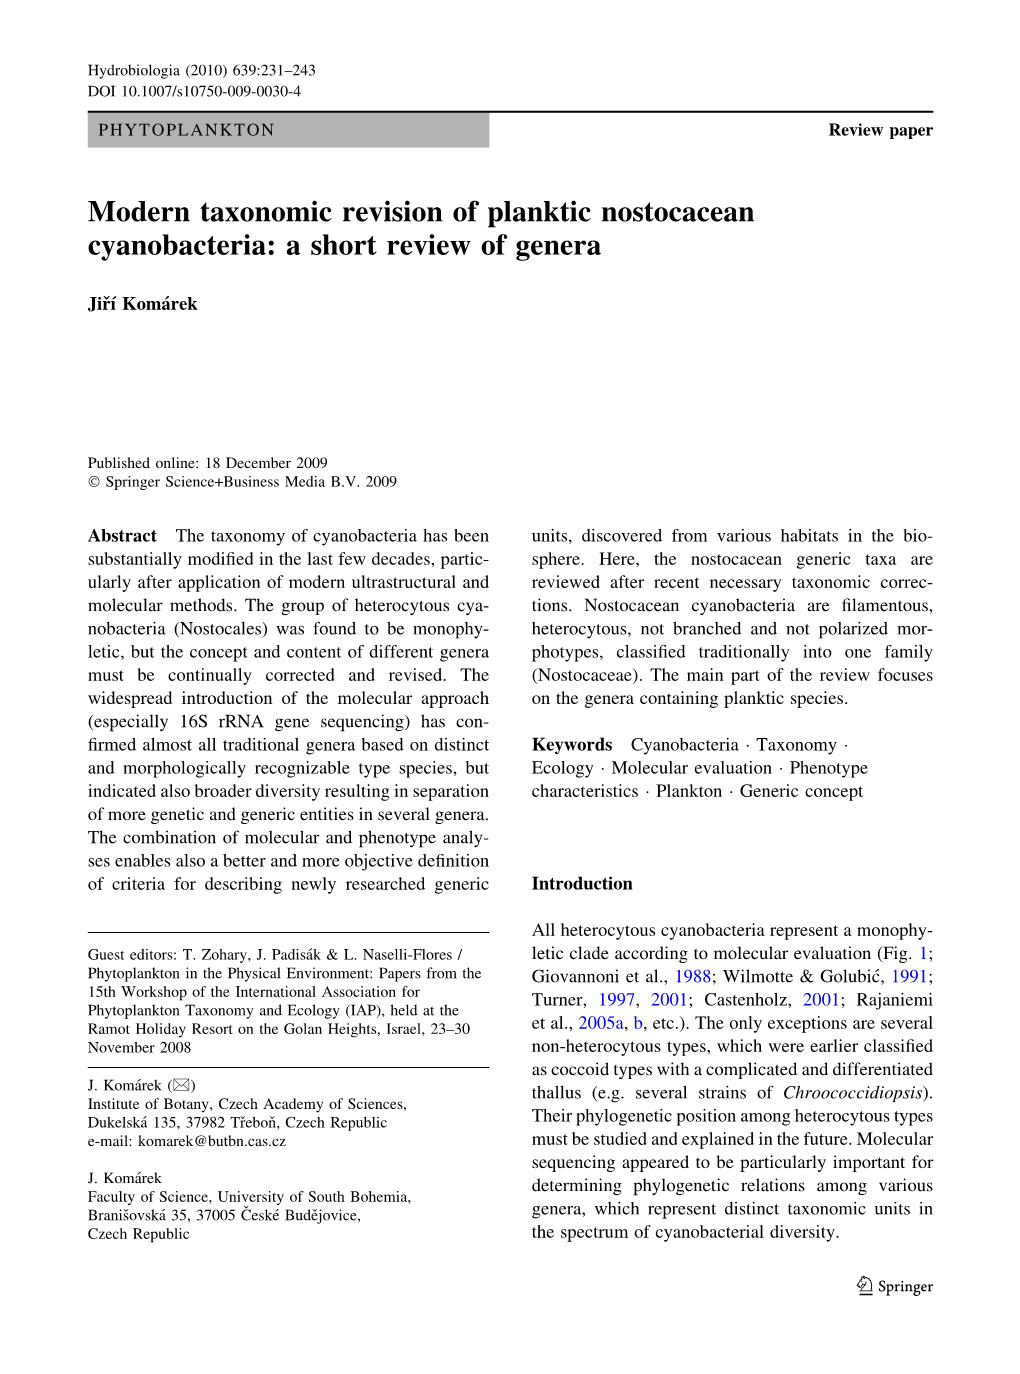 Modern Taxonomic Revision of Planktic Nostocacean Cyanobacteria: a Short Review of Genera